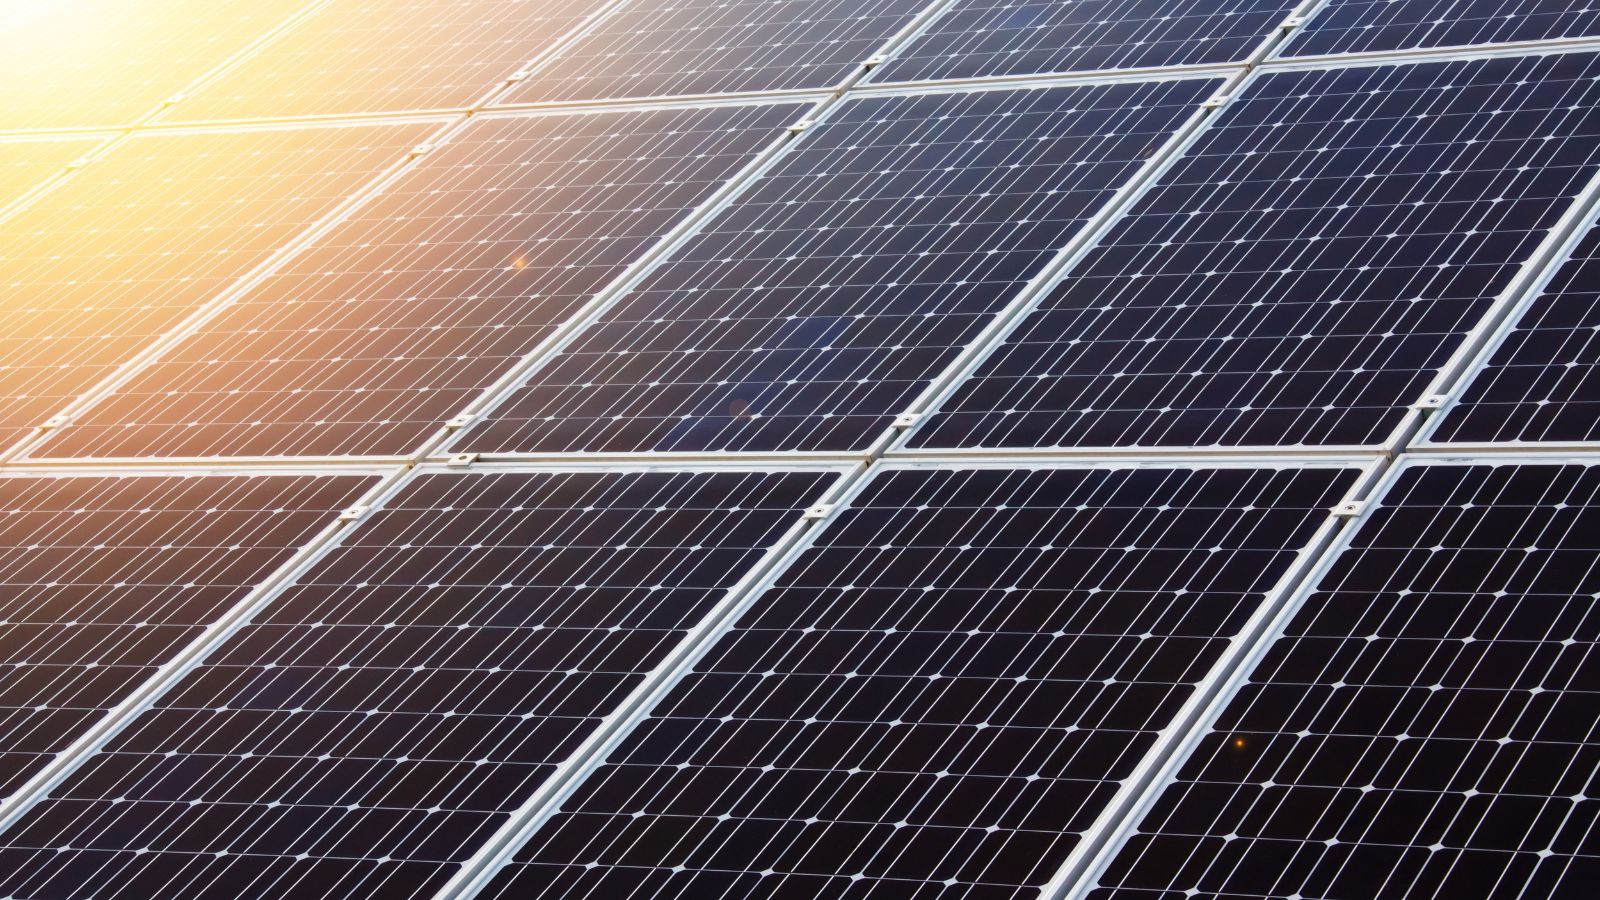 solar-panel-grants-and-government-incentives-in-the-uk-regalgrid